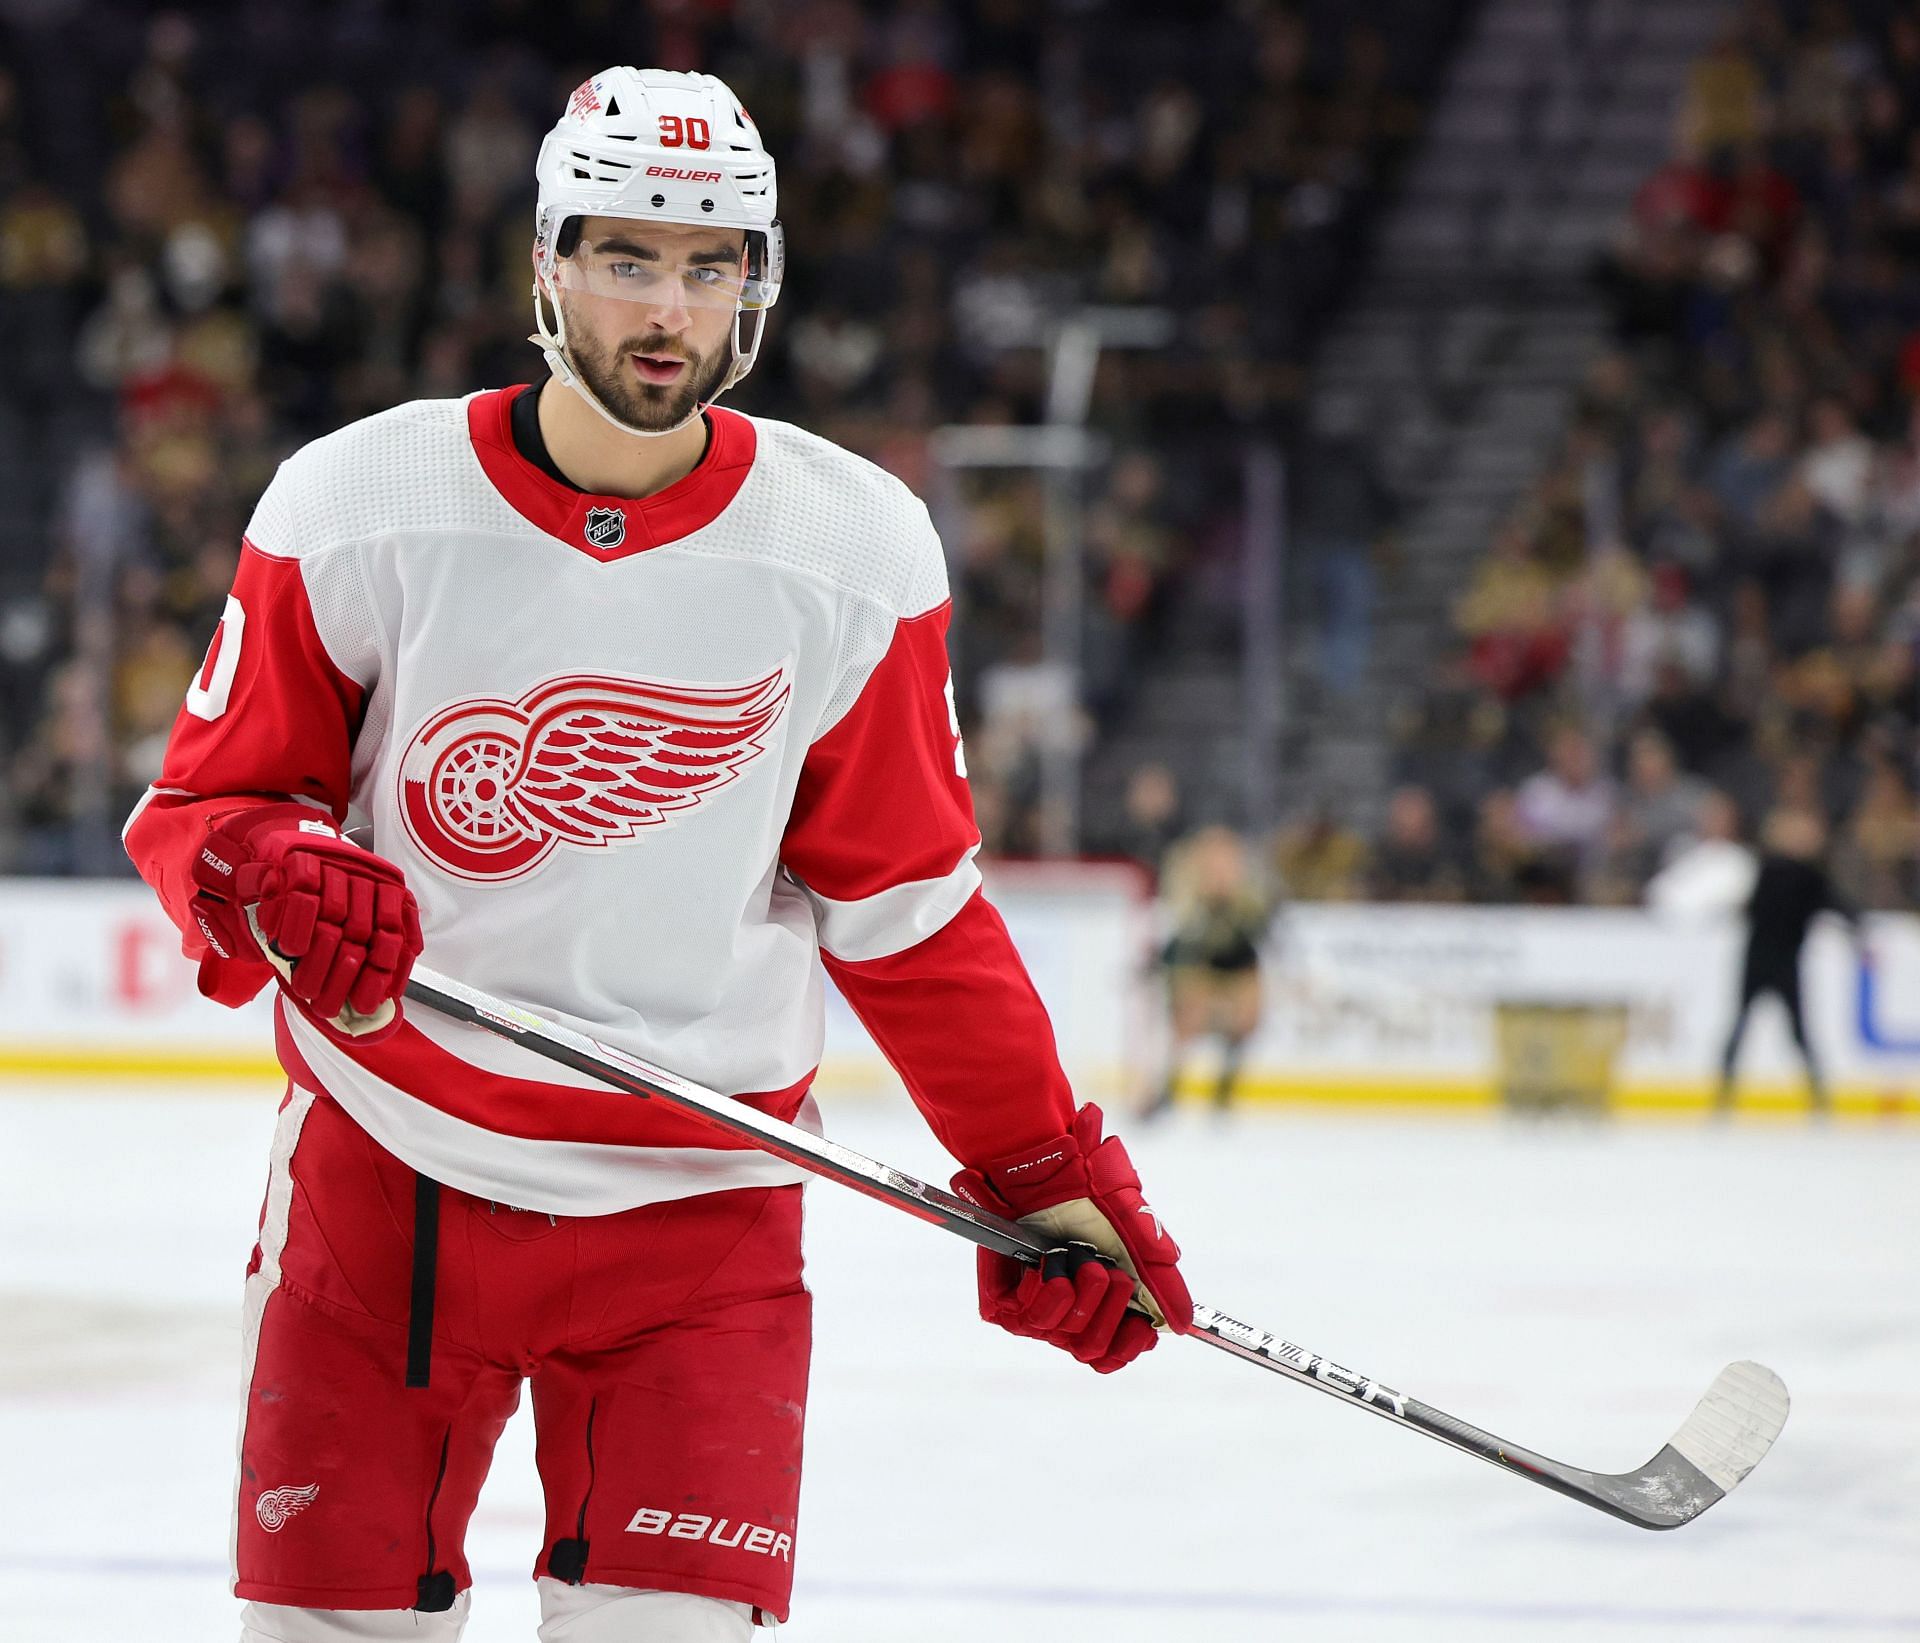 Joe Veleno working as hard as he can to make Detroit Red Wings roster